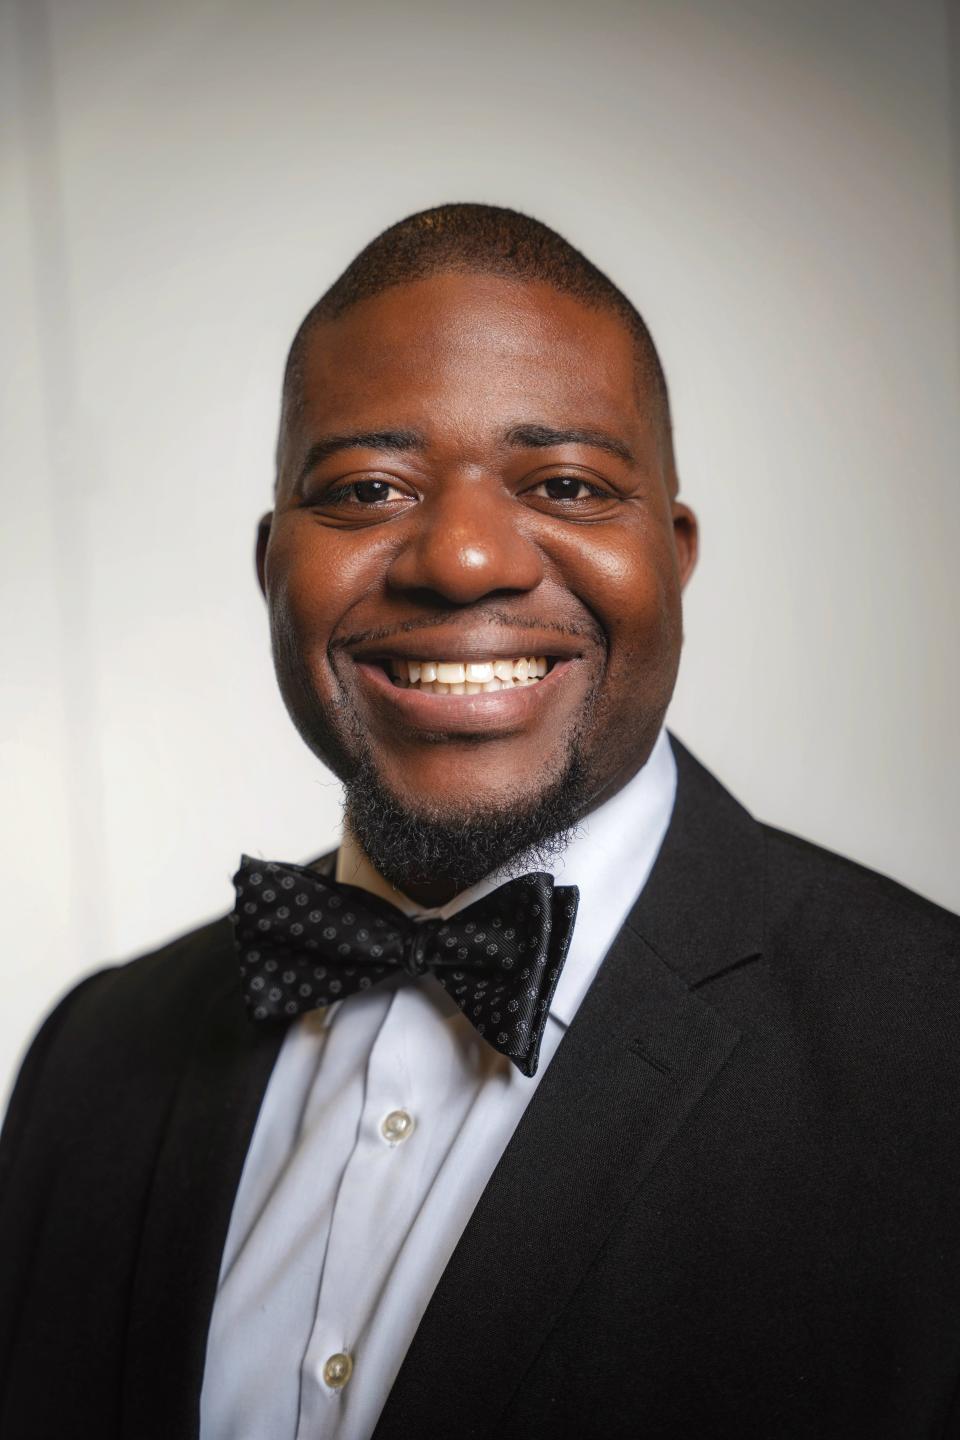 Dr. Lawrence Brown is a general surgery resident at Johns Hopkins University and a Ph.D. student at the Johns Hopkins Bloomberg School of Public Health.